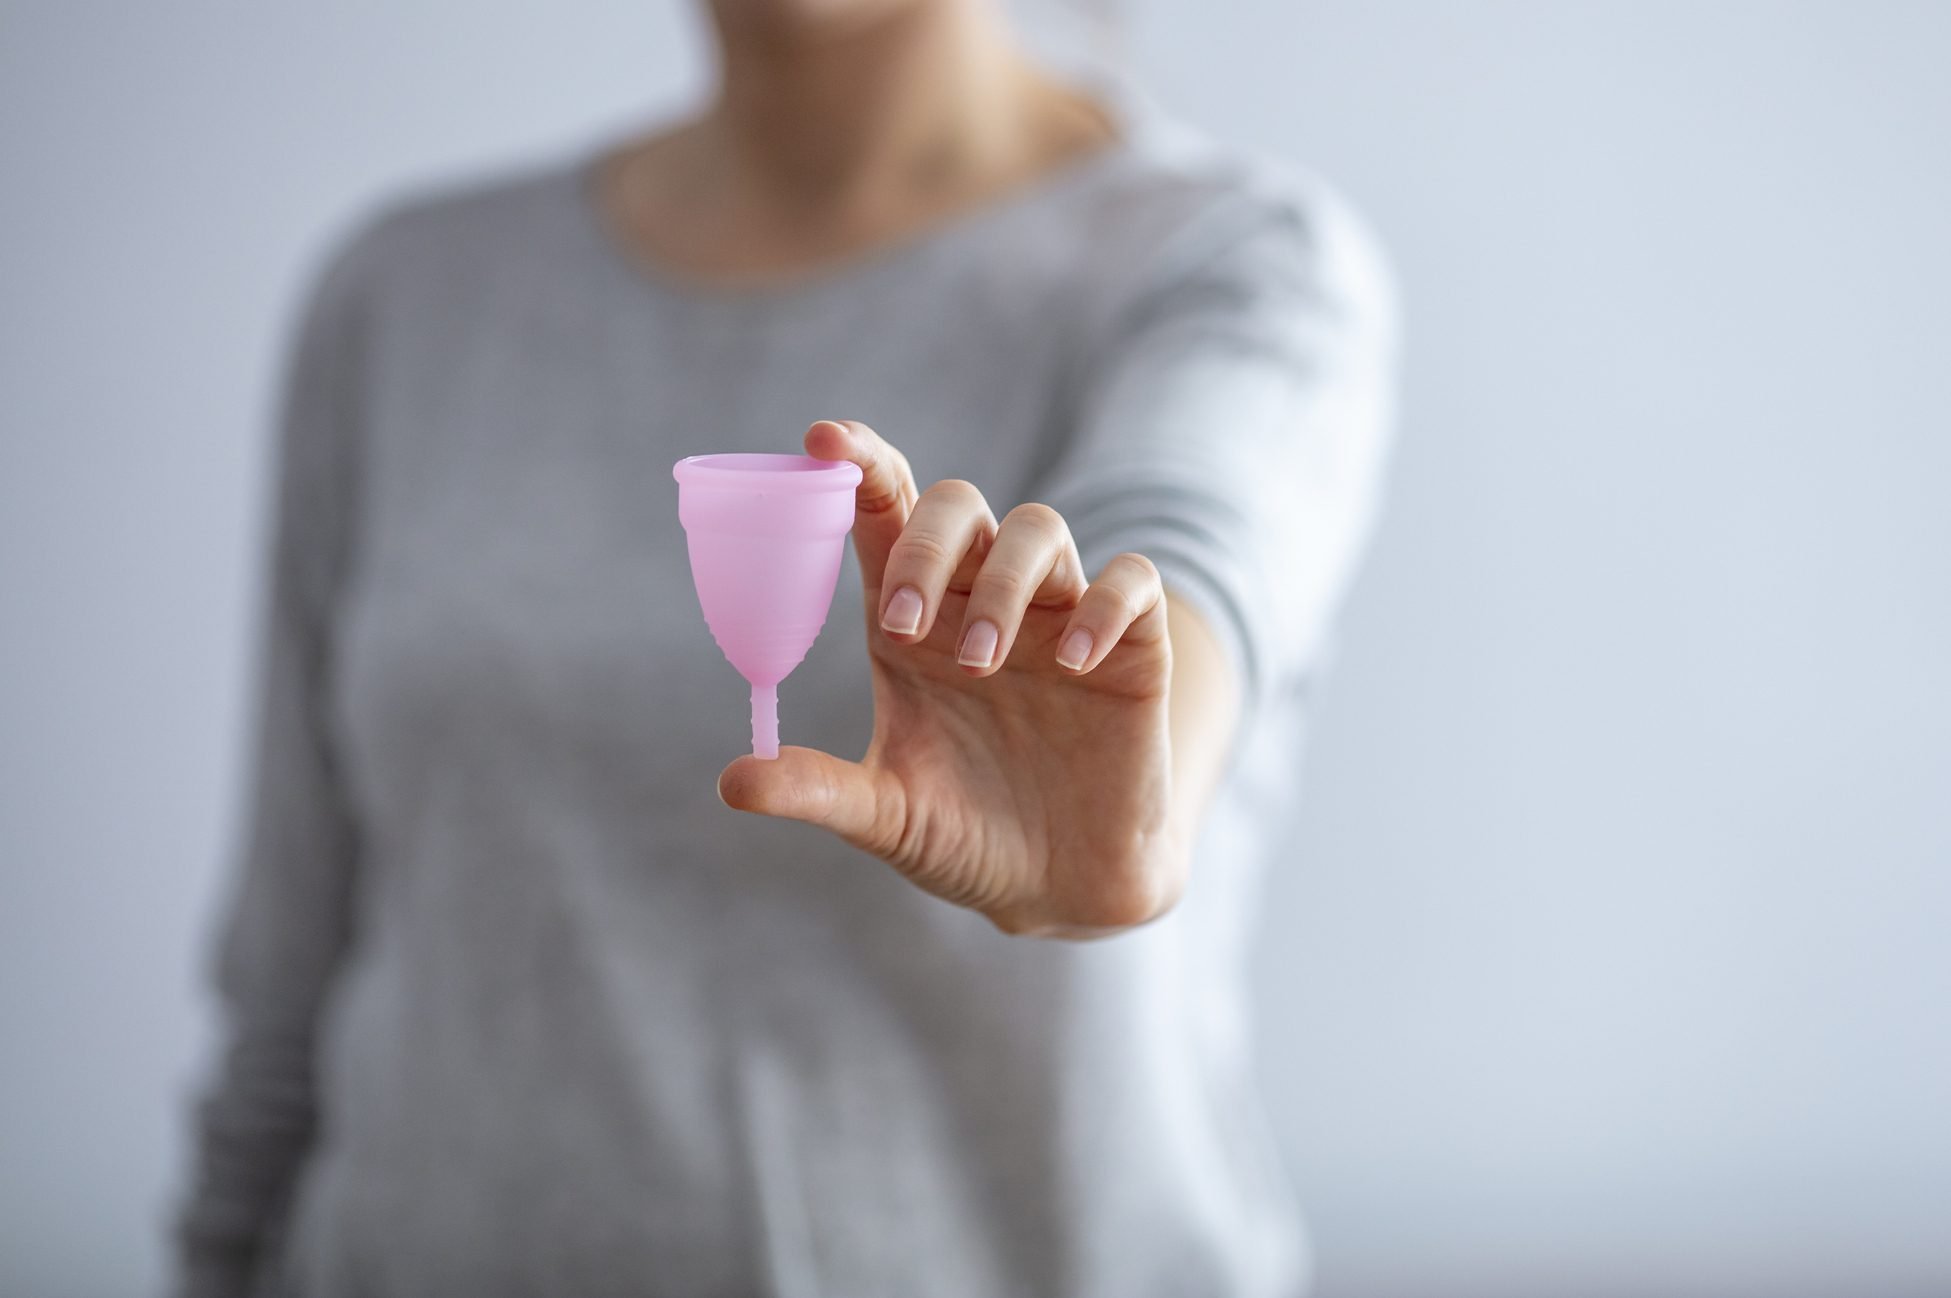 Can a Menstrual Cup Displace an IUD? A Doctor Says It’s a “Growing” Concern